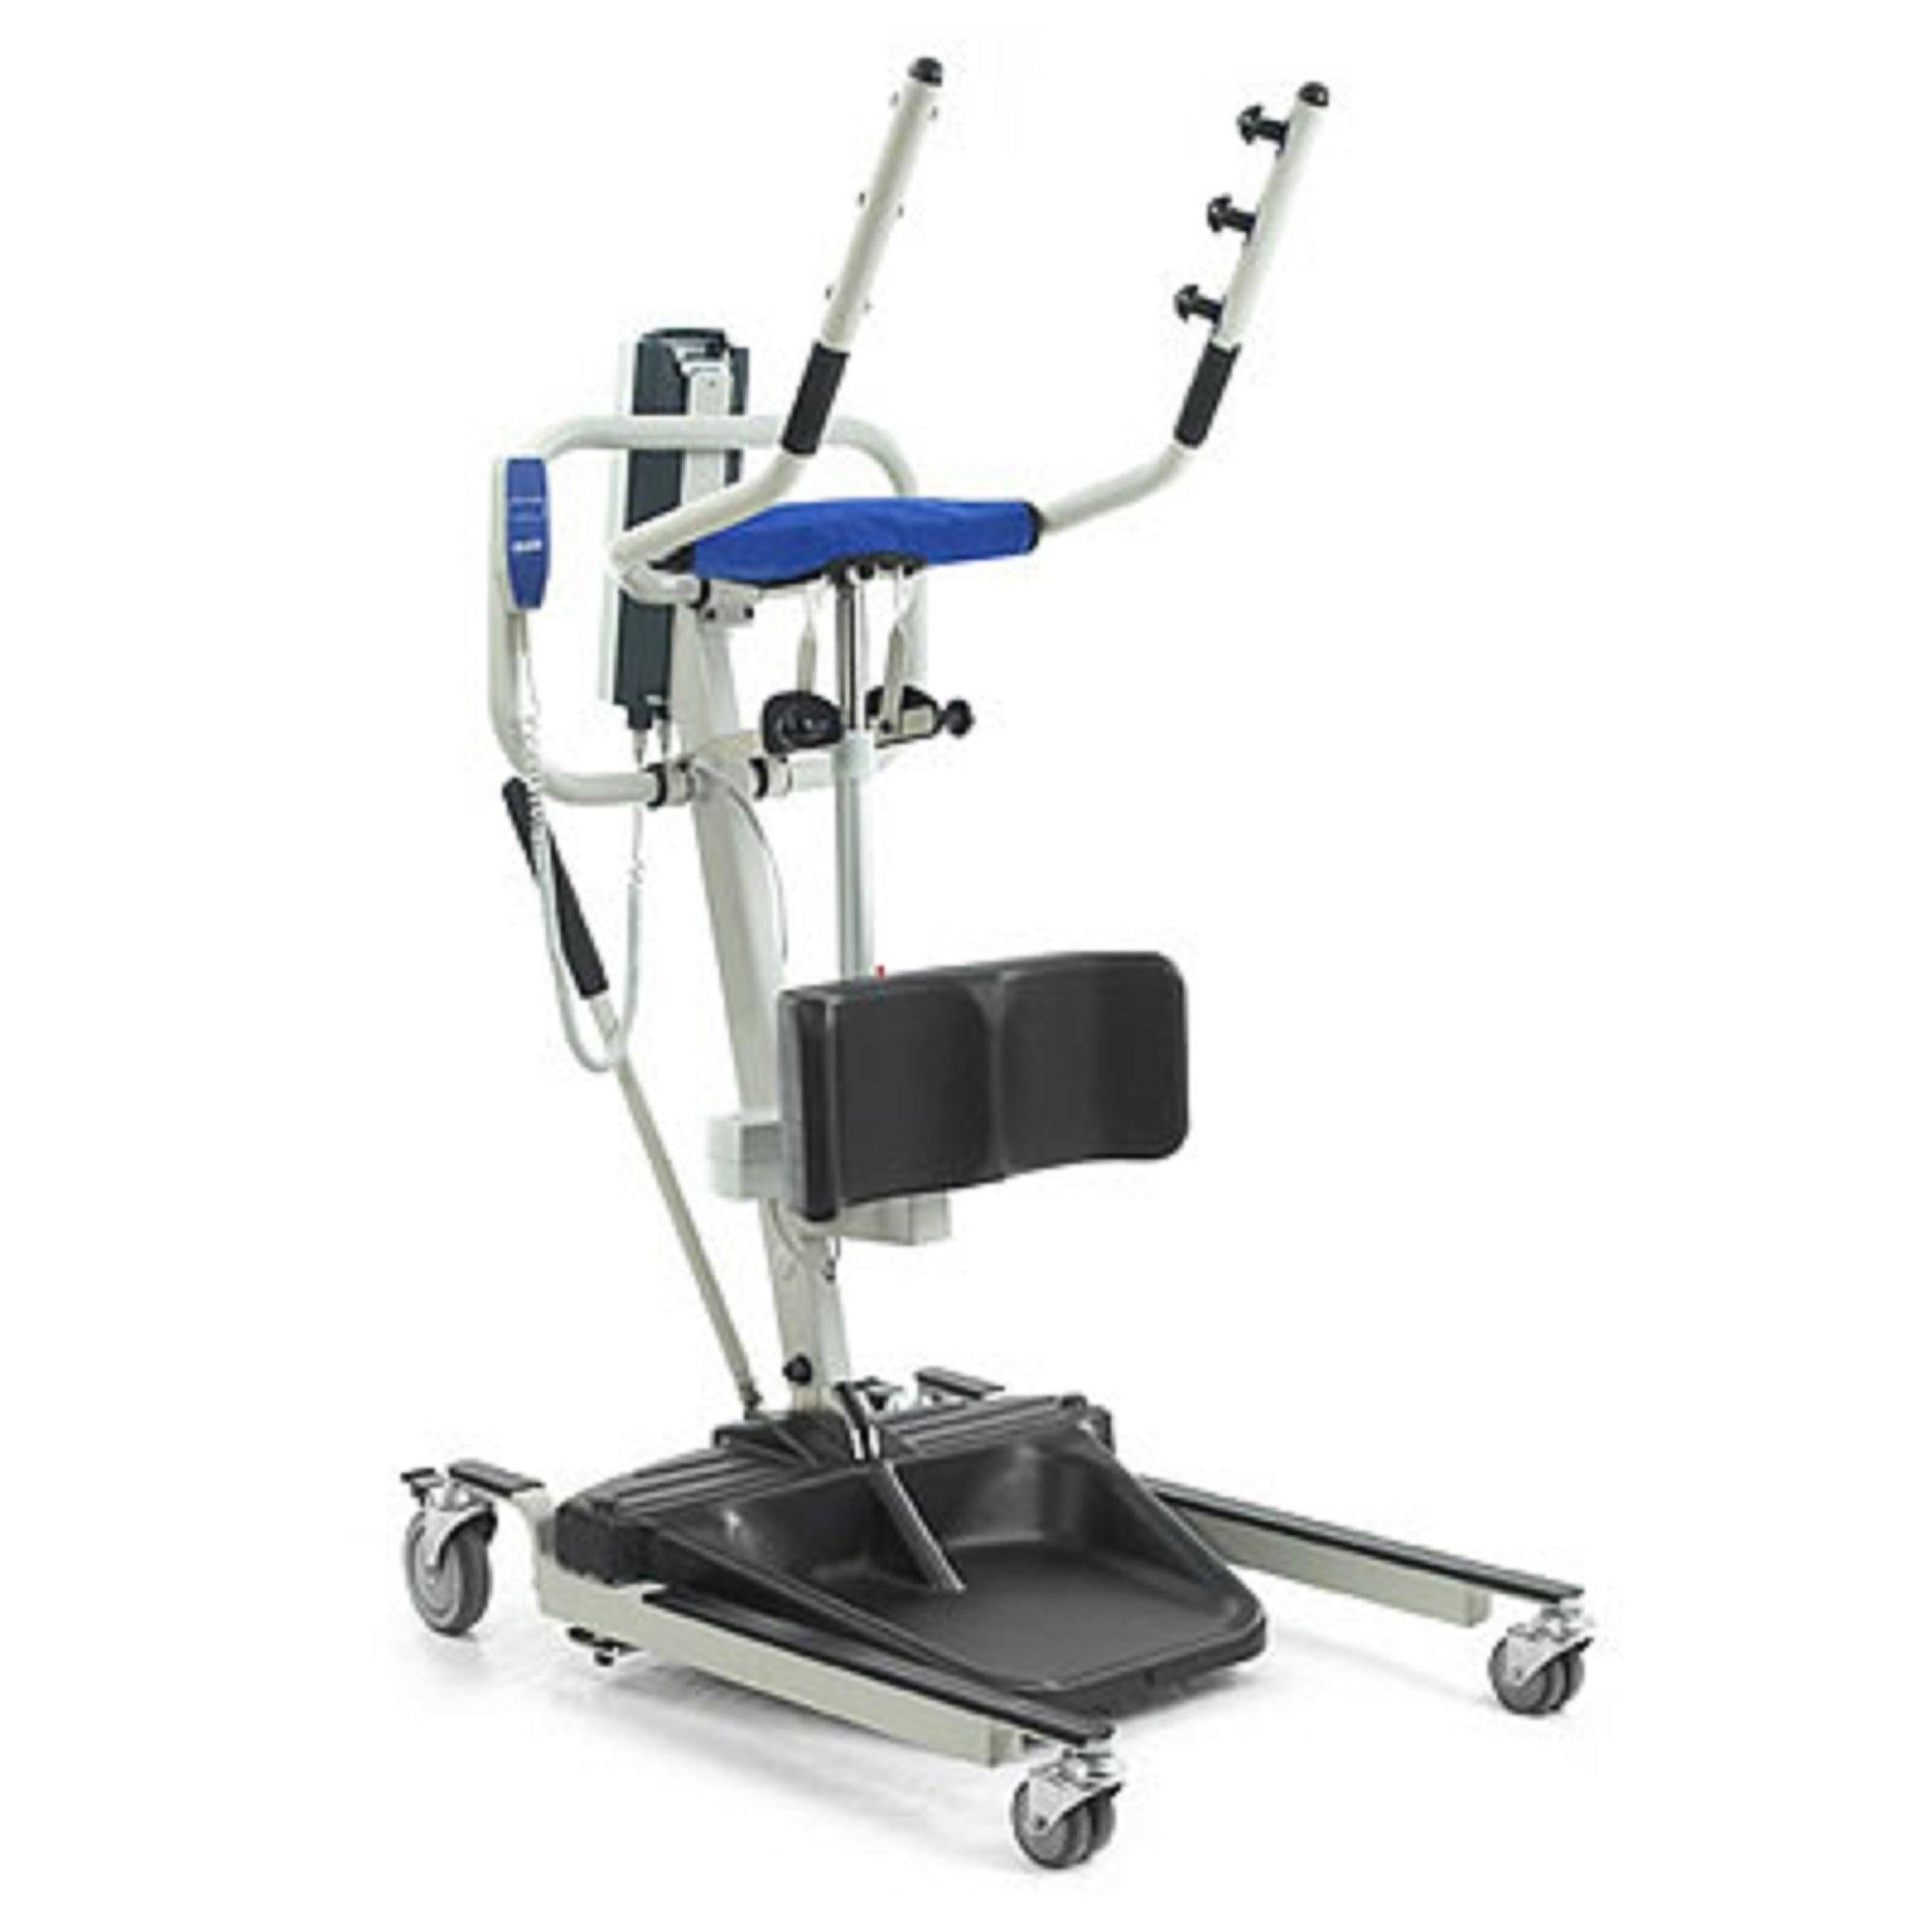 New Invacare Reliant 350 Electric Sit To Stand Lift Rps350 1 Rps350 2 Mobility Equipment For Less 7012